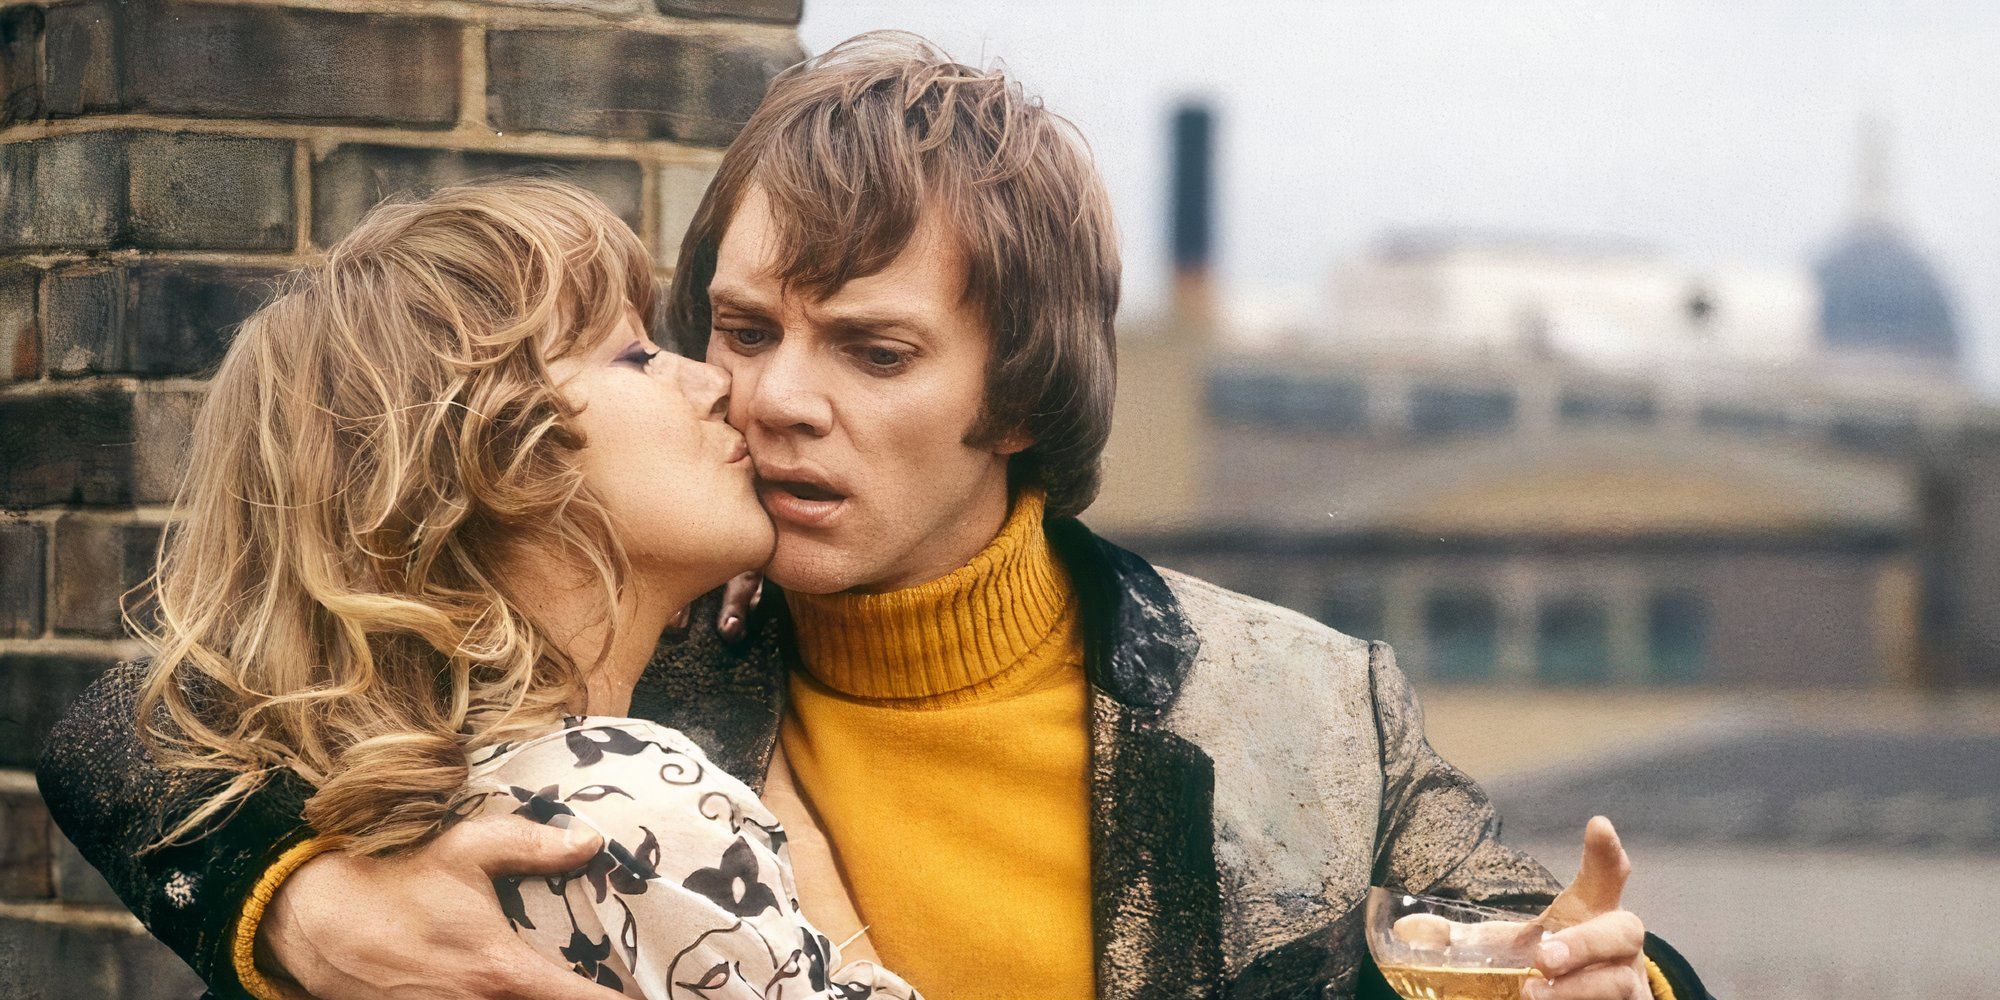 Helen Mirren as Patricia kissing Malcolm McDowell as Michael on the cheek in O Lucky Man!